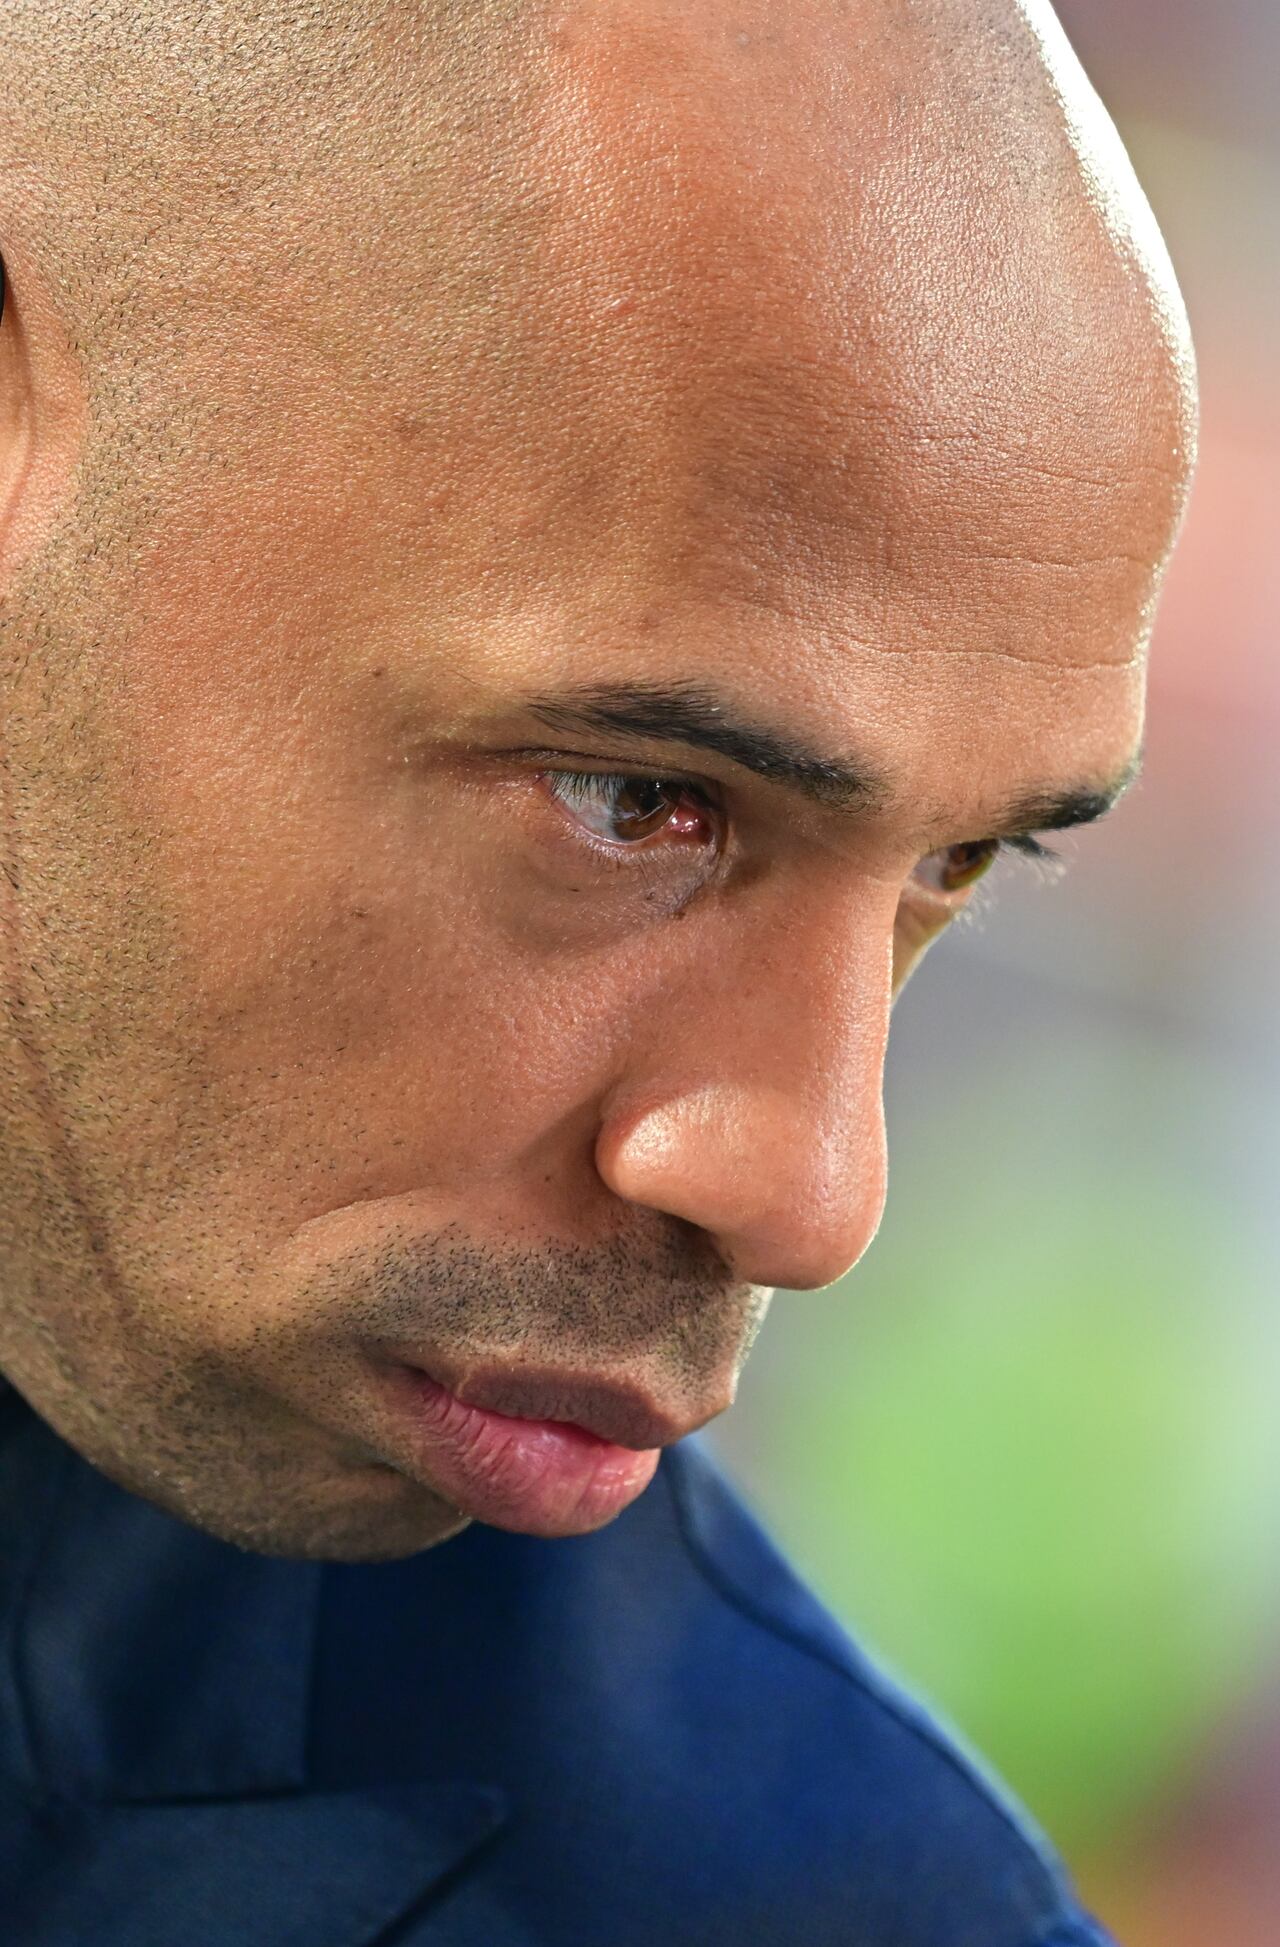 LENS, FRANCE - AUGUST 20: Thierry Henry French consultant Prime Video and news coach French espoir during the French Ligue 1 soccer match between RC Lens and Stade Rennais at Stade Bollaert - Delelis on August 20 2023 in Lens, France. (Photo by Christian Liewig - Corbis/Corbis via Getty Images)